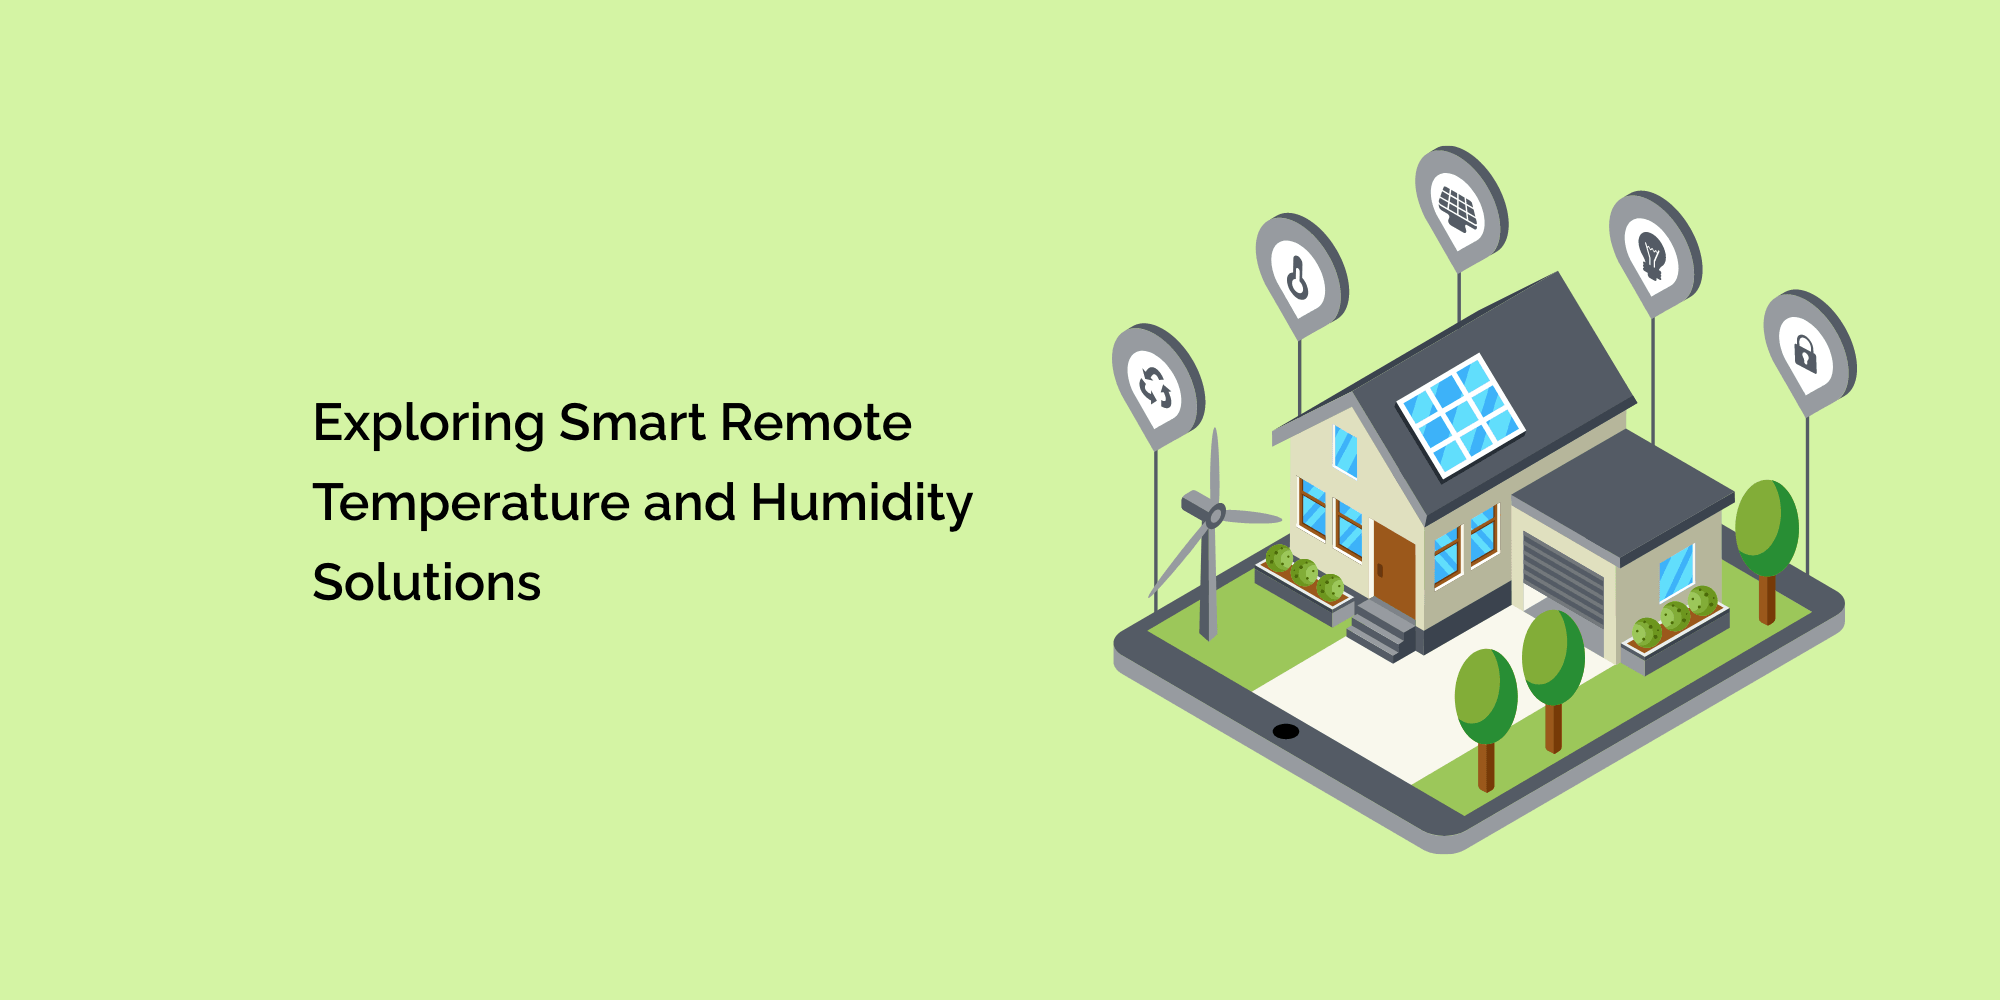 Exploring Smart Remote Temperature and Humidity Solutions